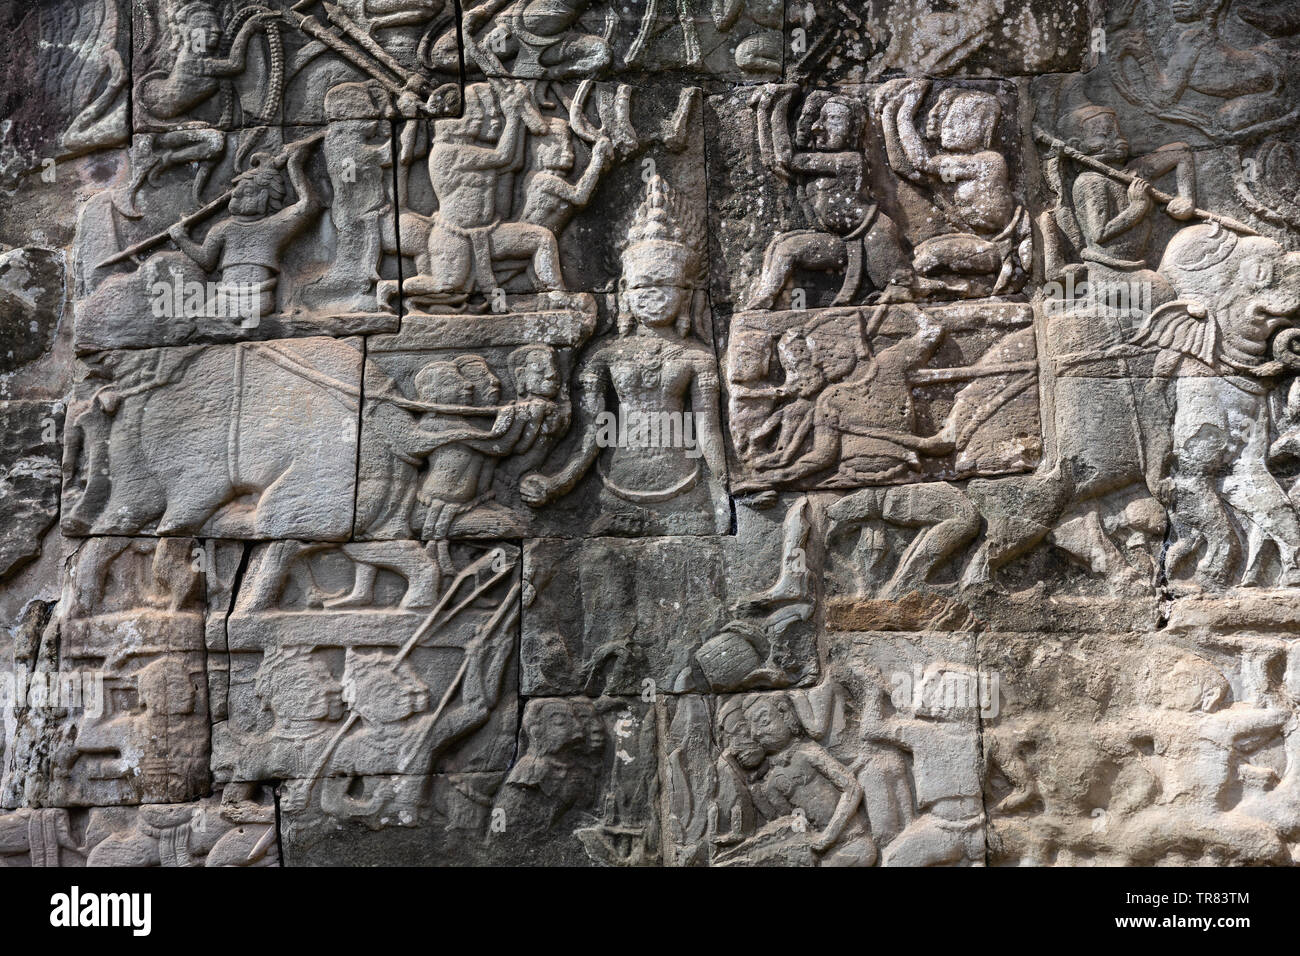 Ancient carving at Bayon Temple, Angkor Thom, UNESCO World Heritage Site, Siem Reap Province, Cambodia, Indochina, Southeast Asia, Asia Stock Photo